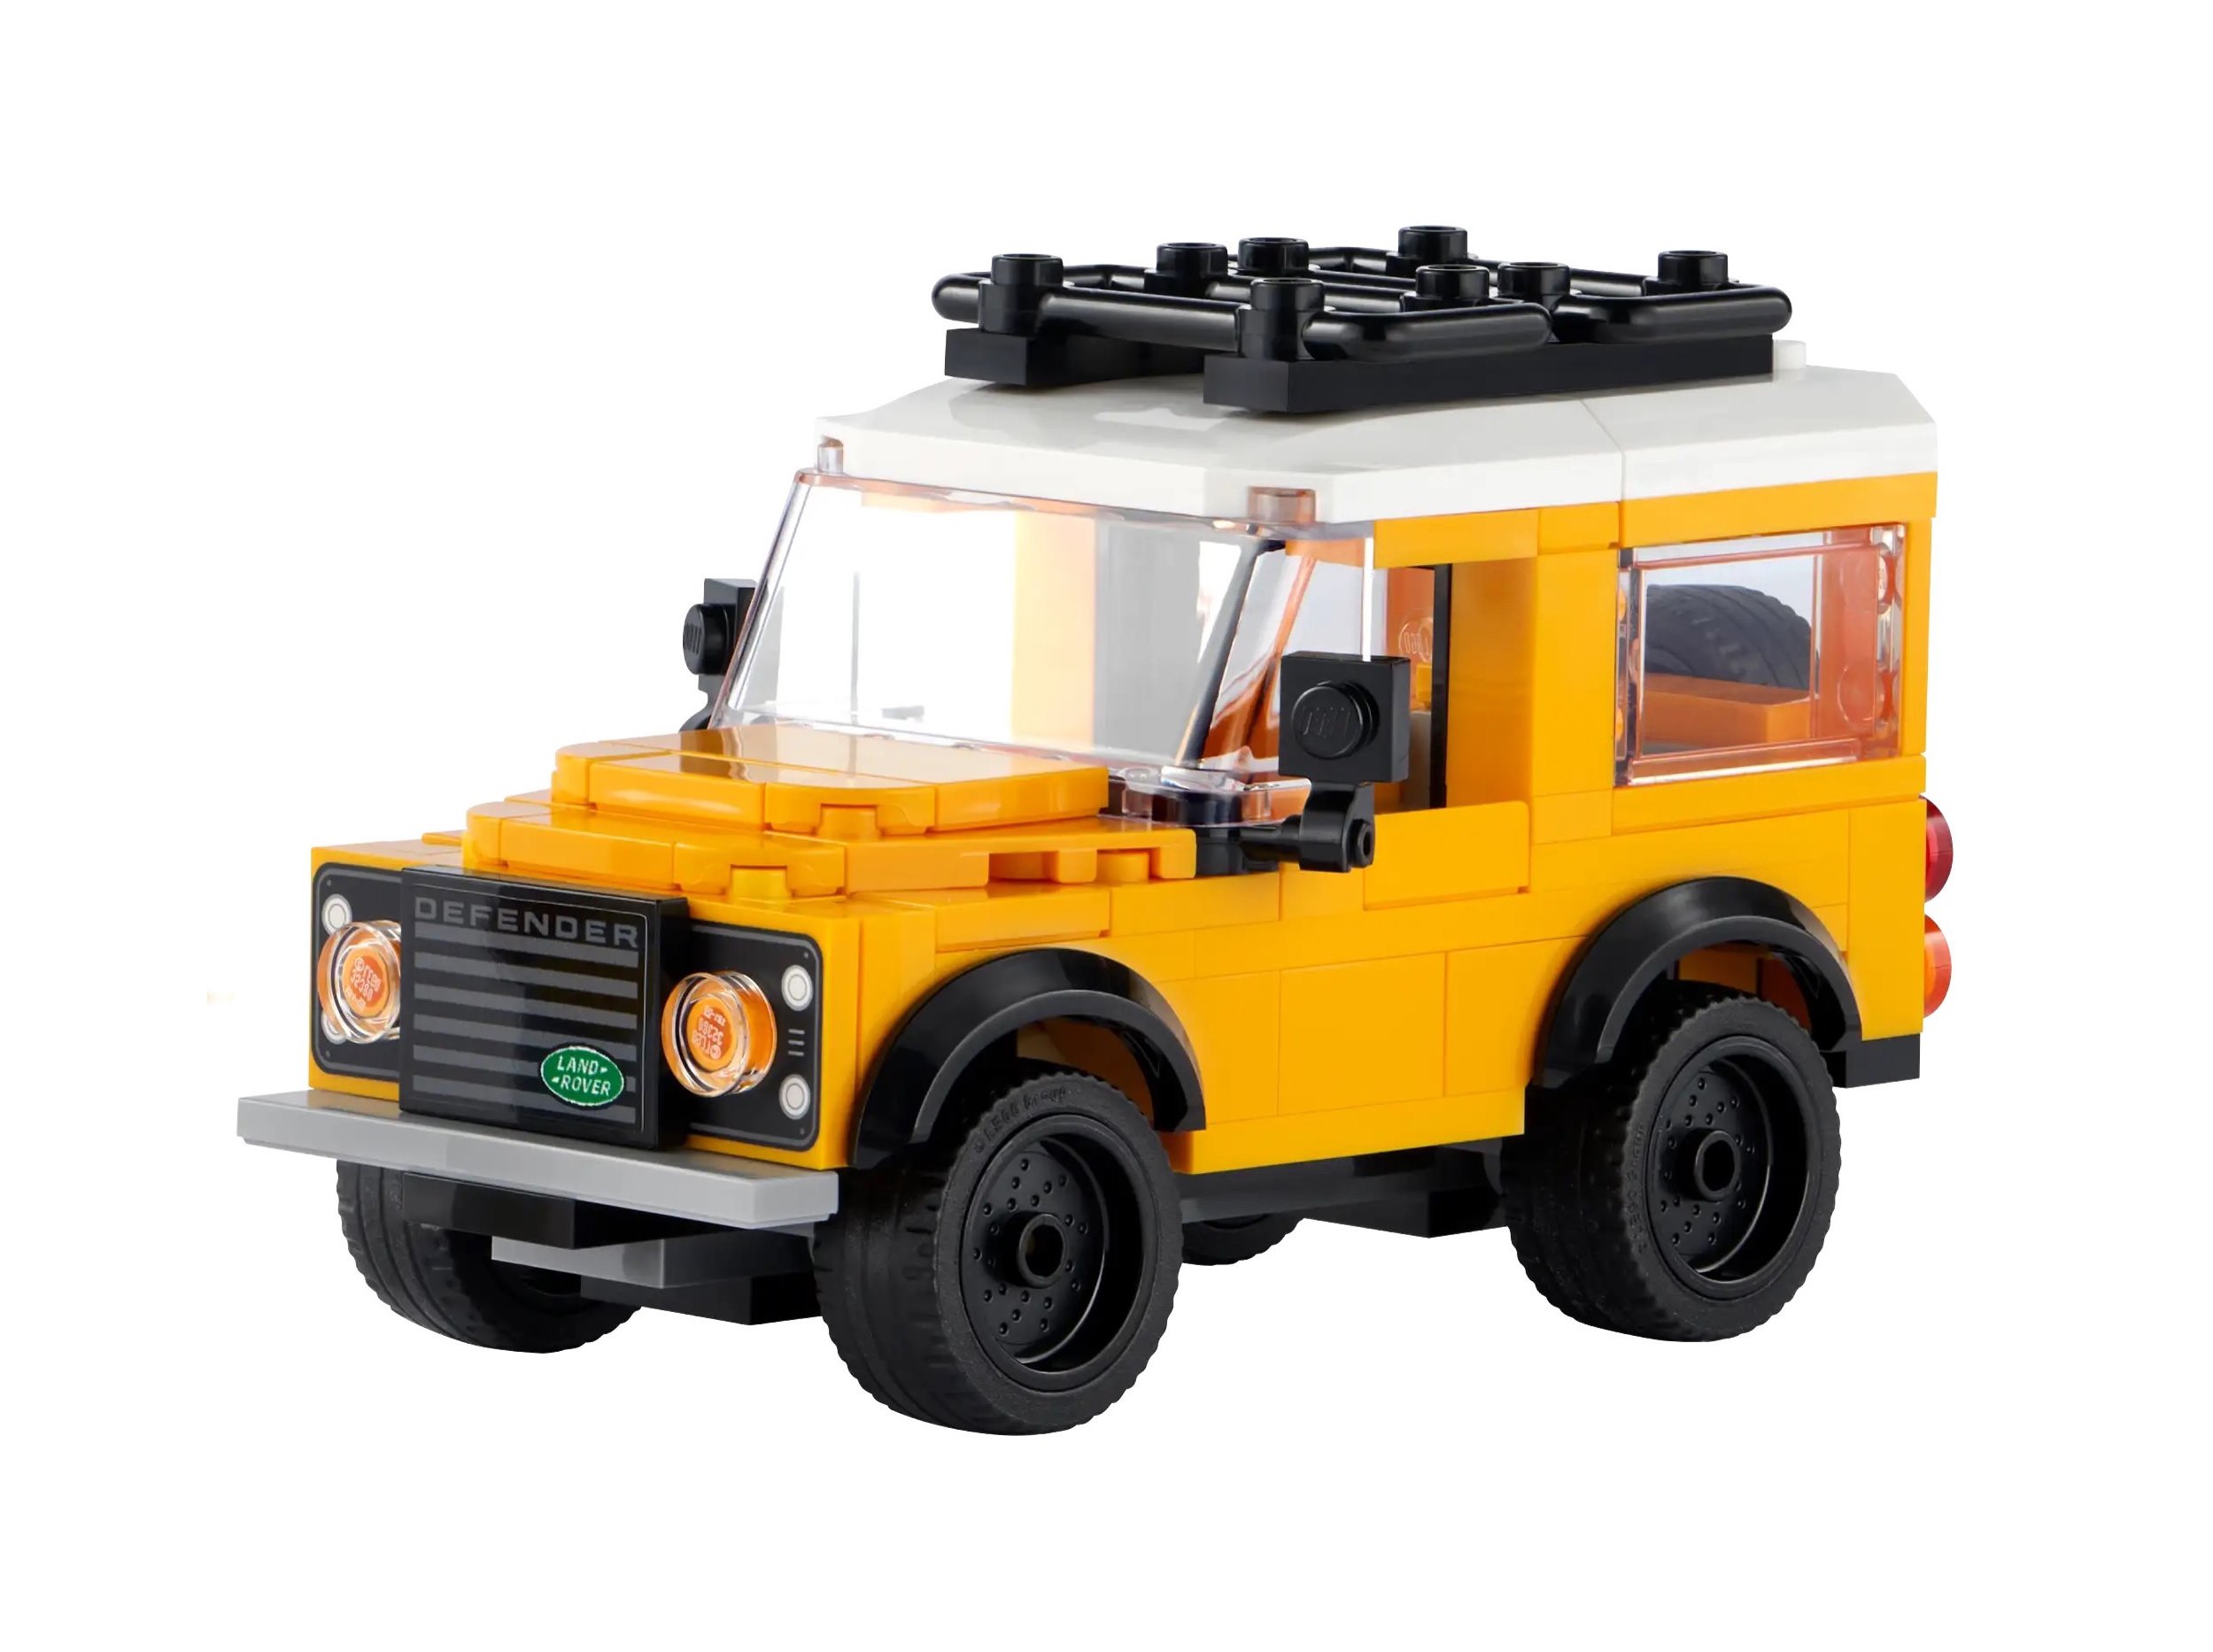 The New Lego Land Rover Classic Defender - $14.99 USD